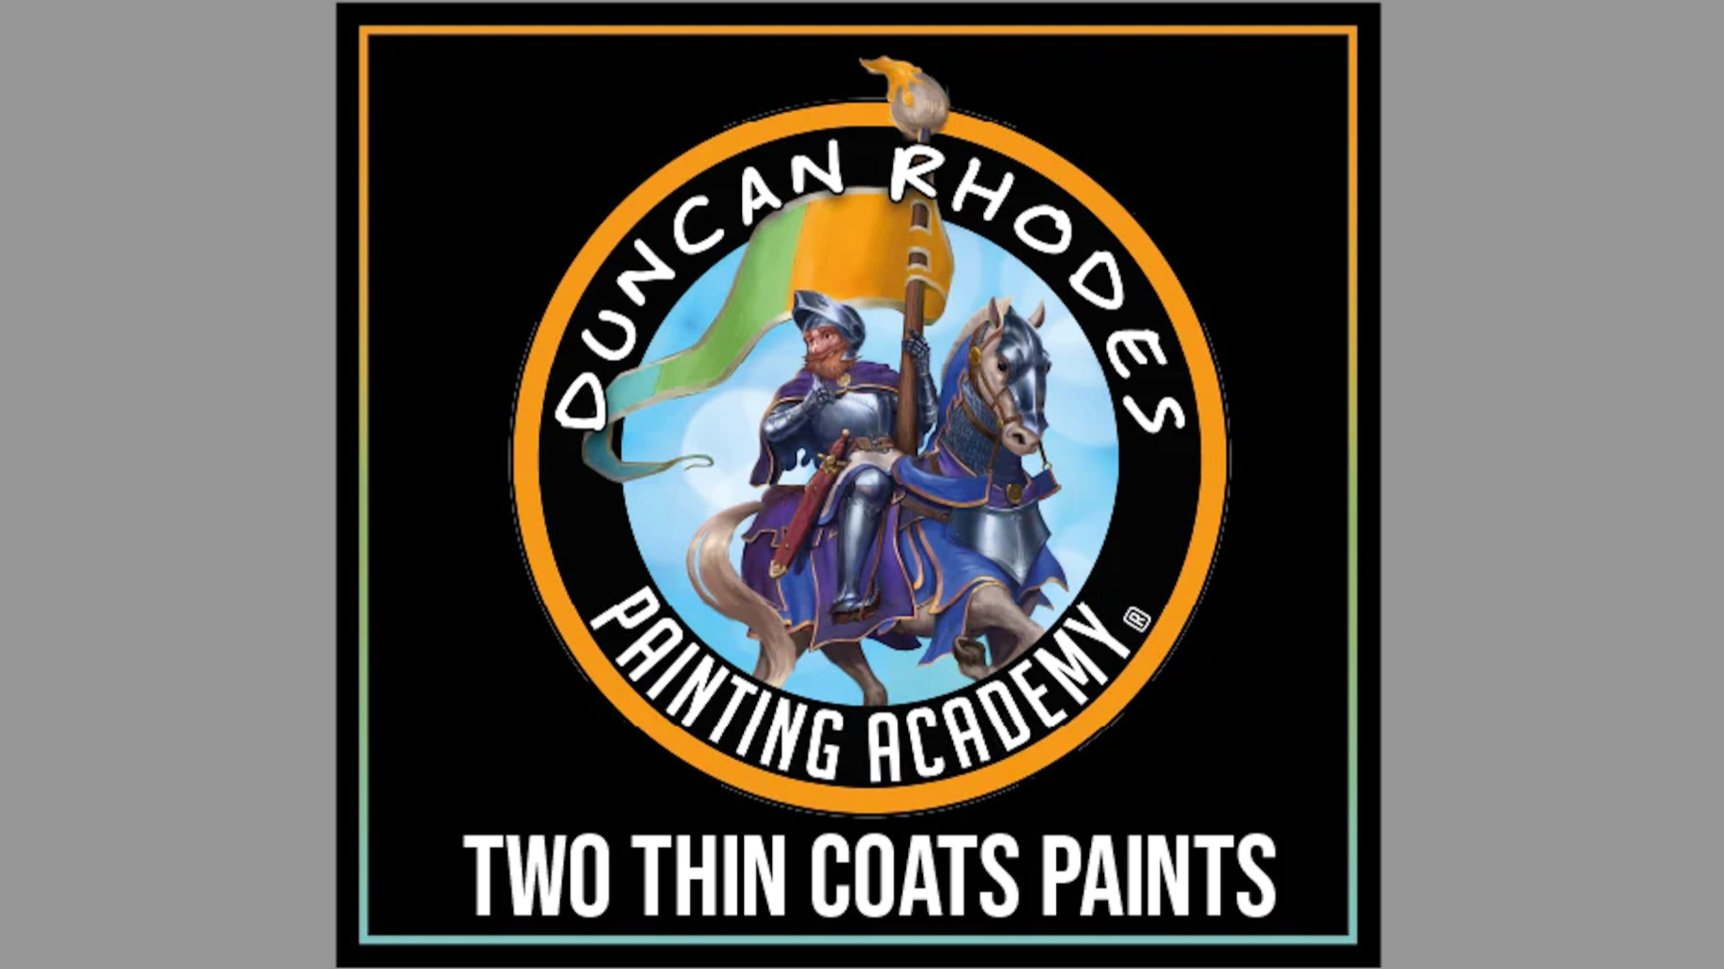 TwoThinCoats.jpg